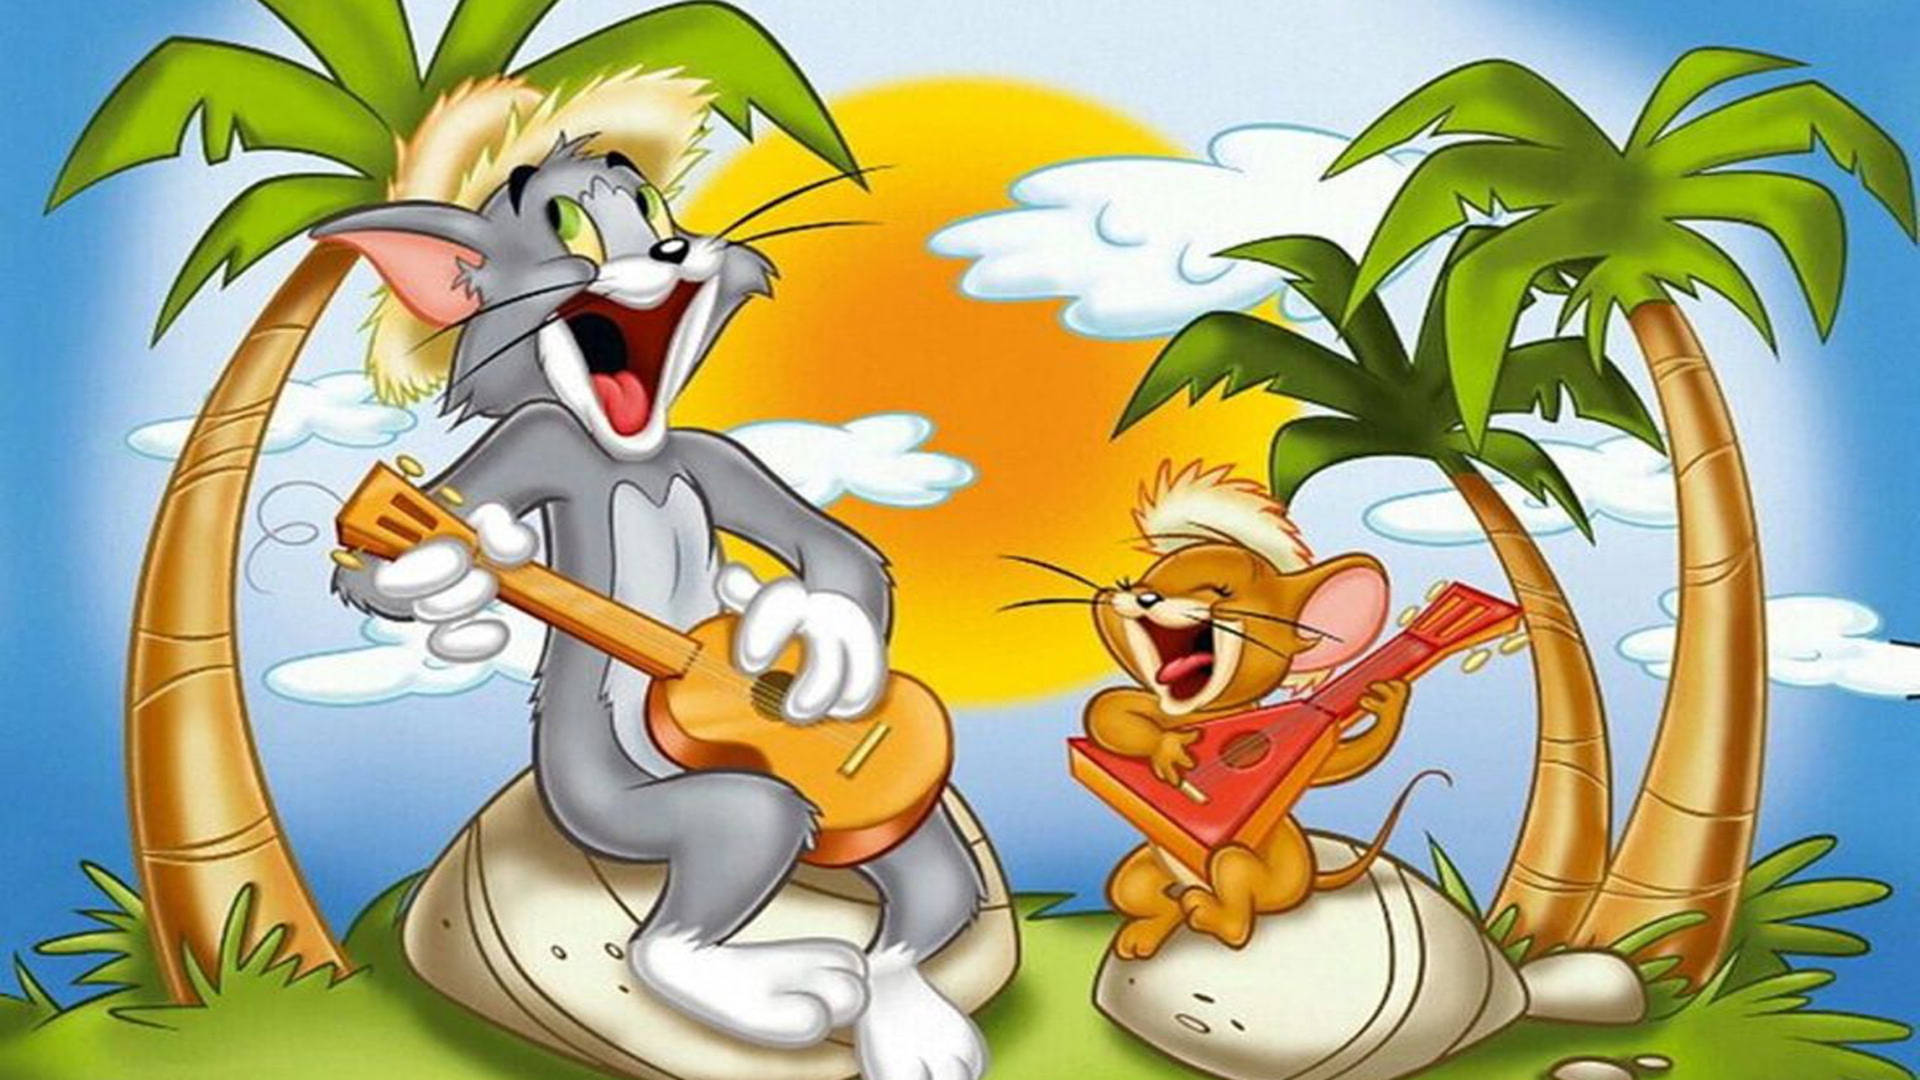 Singing Tom And Jerry Wallpaper